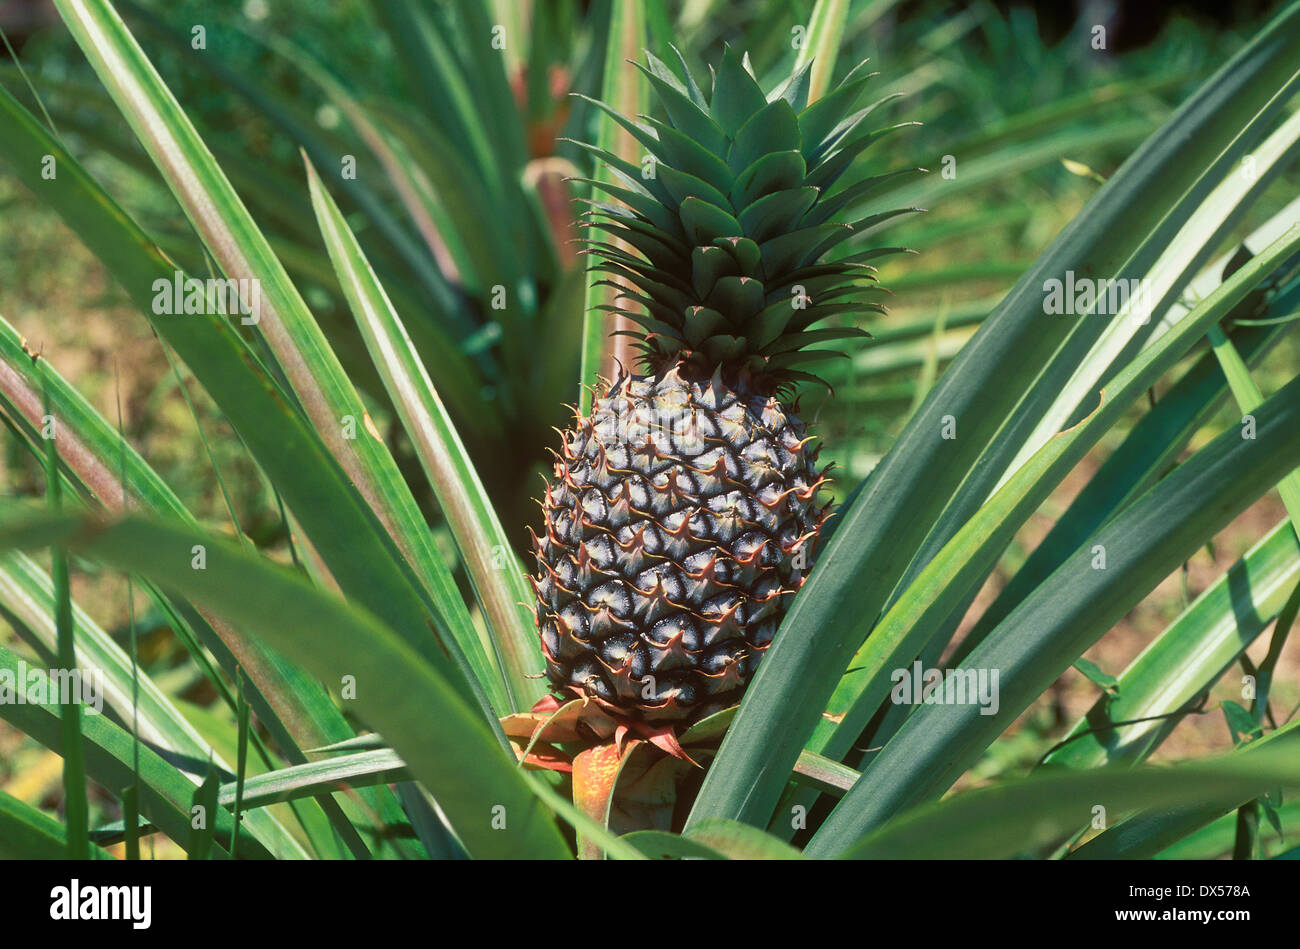 Pineapple (Ananas comosus) growing on a field, pineapple cultivation, Ko Samui, Thailand Stock Photo